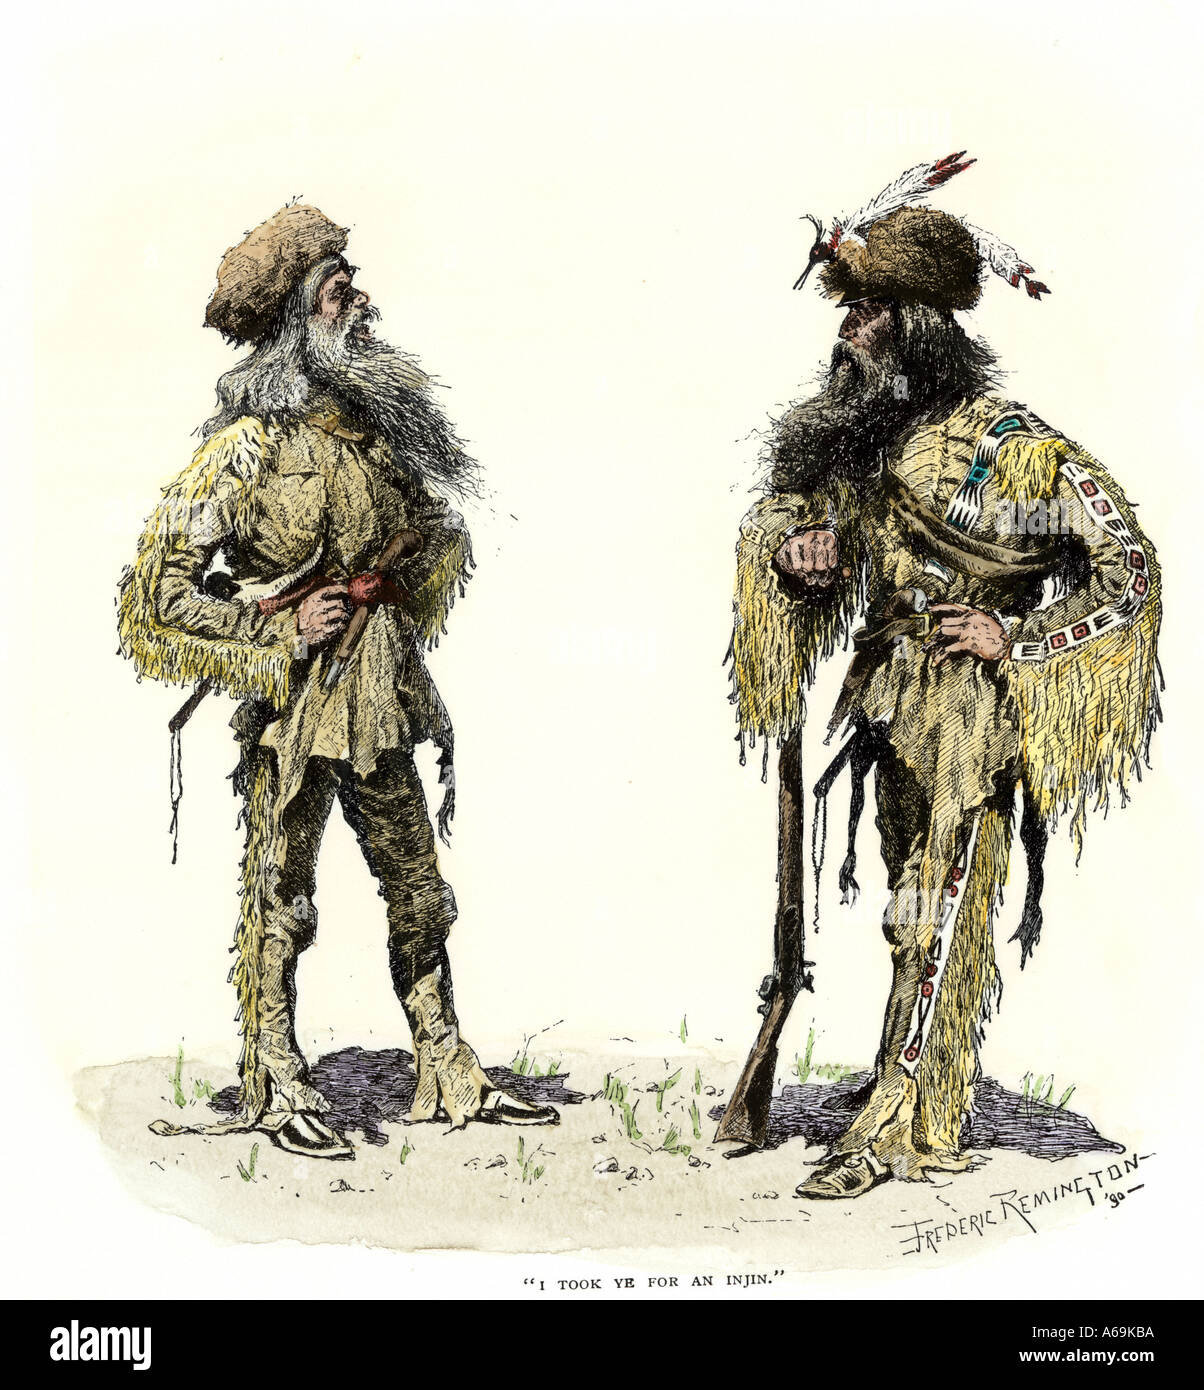 Mountain men greeting each other, ' I took ye for an Injin' (mistook you for an Indian). Hand-colored woodcut of a Frederic Remington illustration Stock Photo